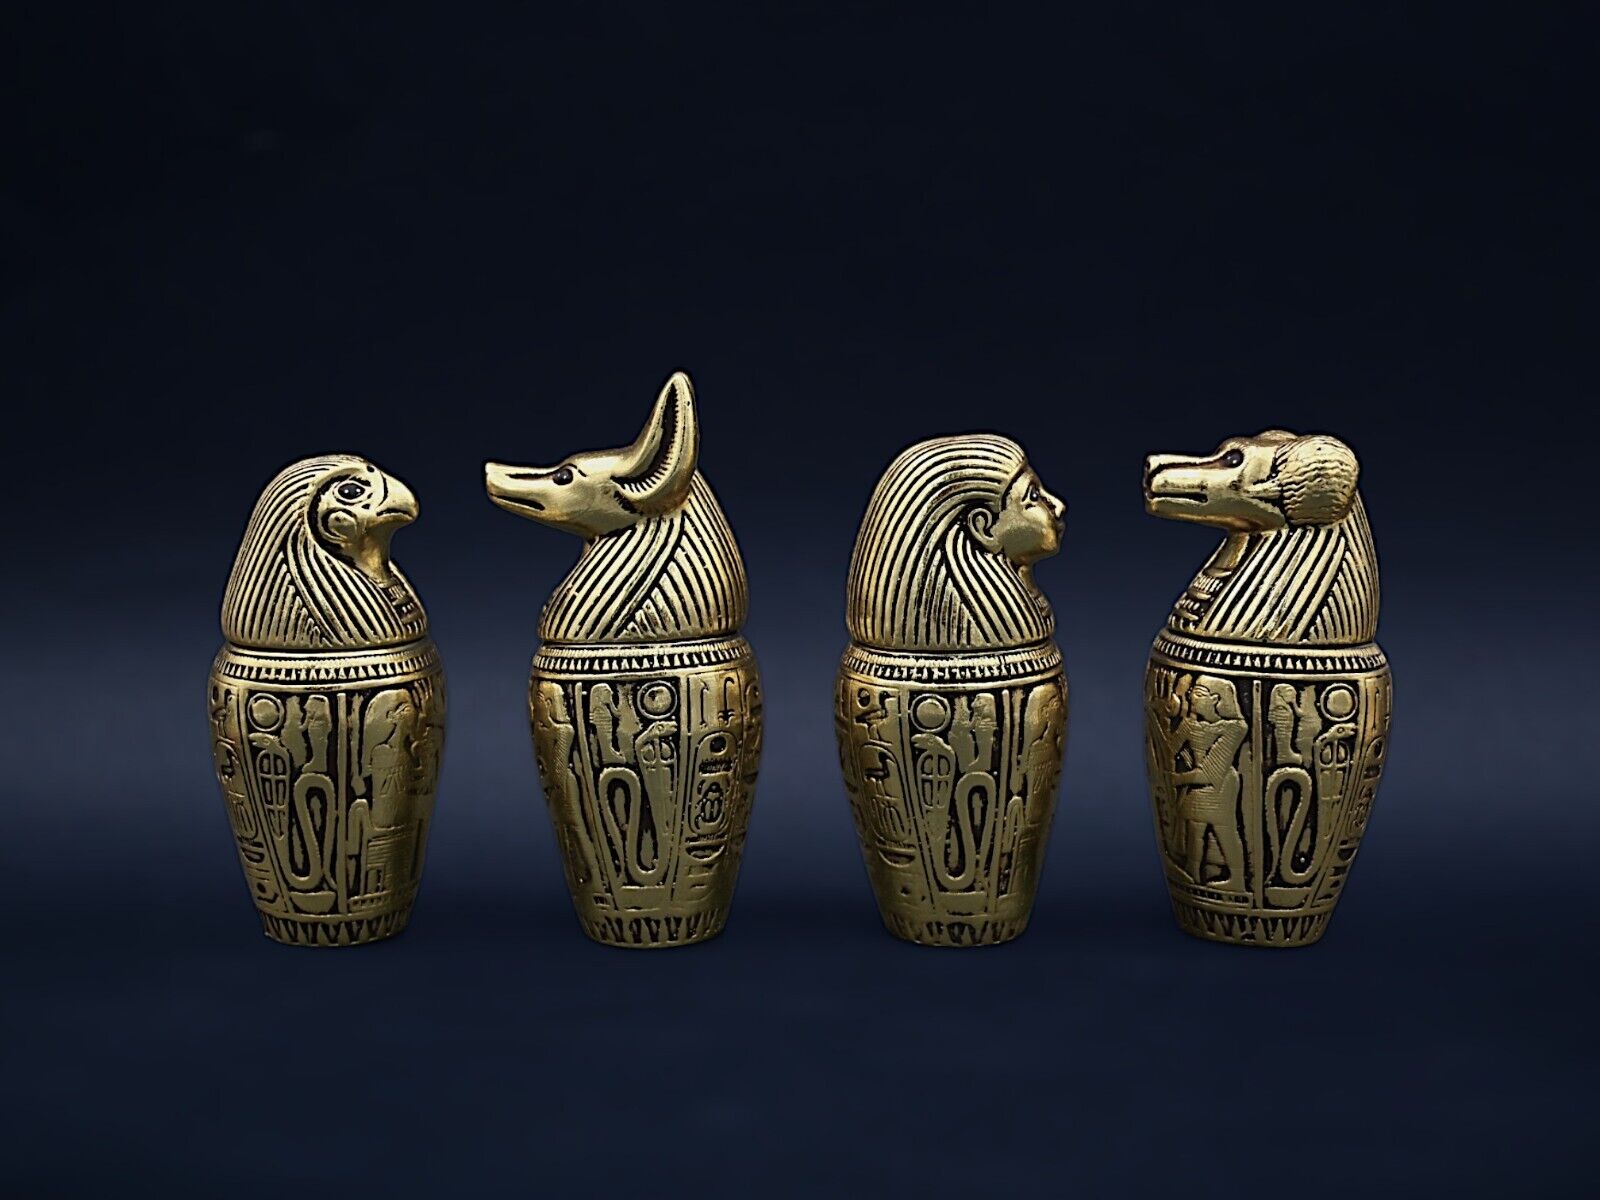 Set of four canopic jars organs Sculpture ancient Egyptian art heavy stone